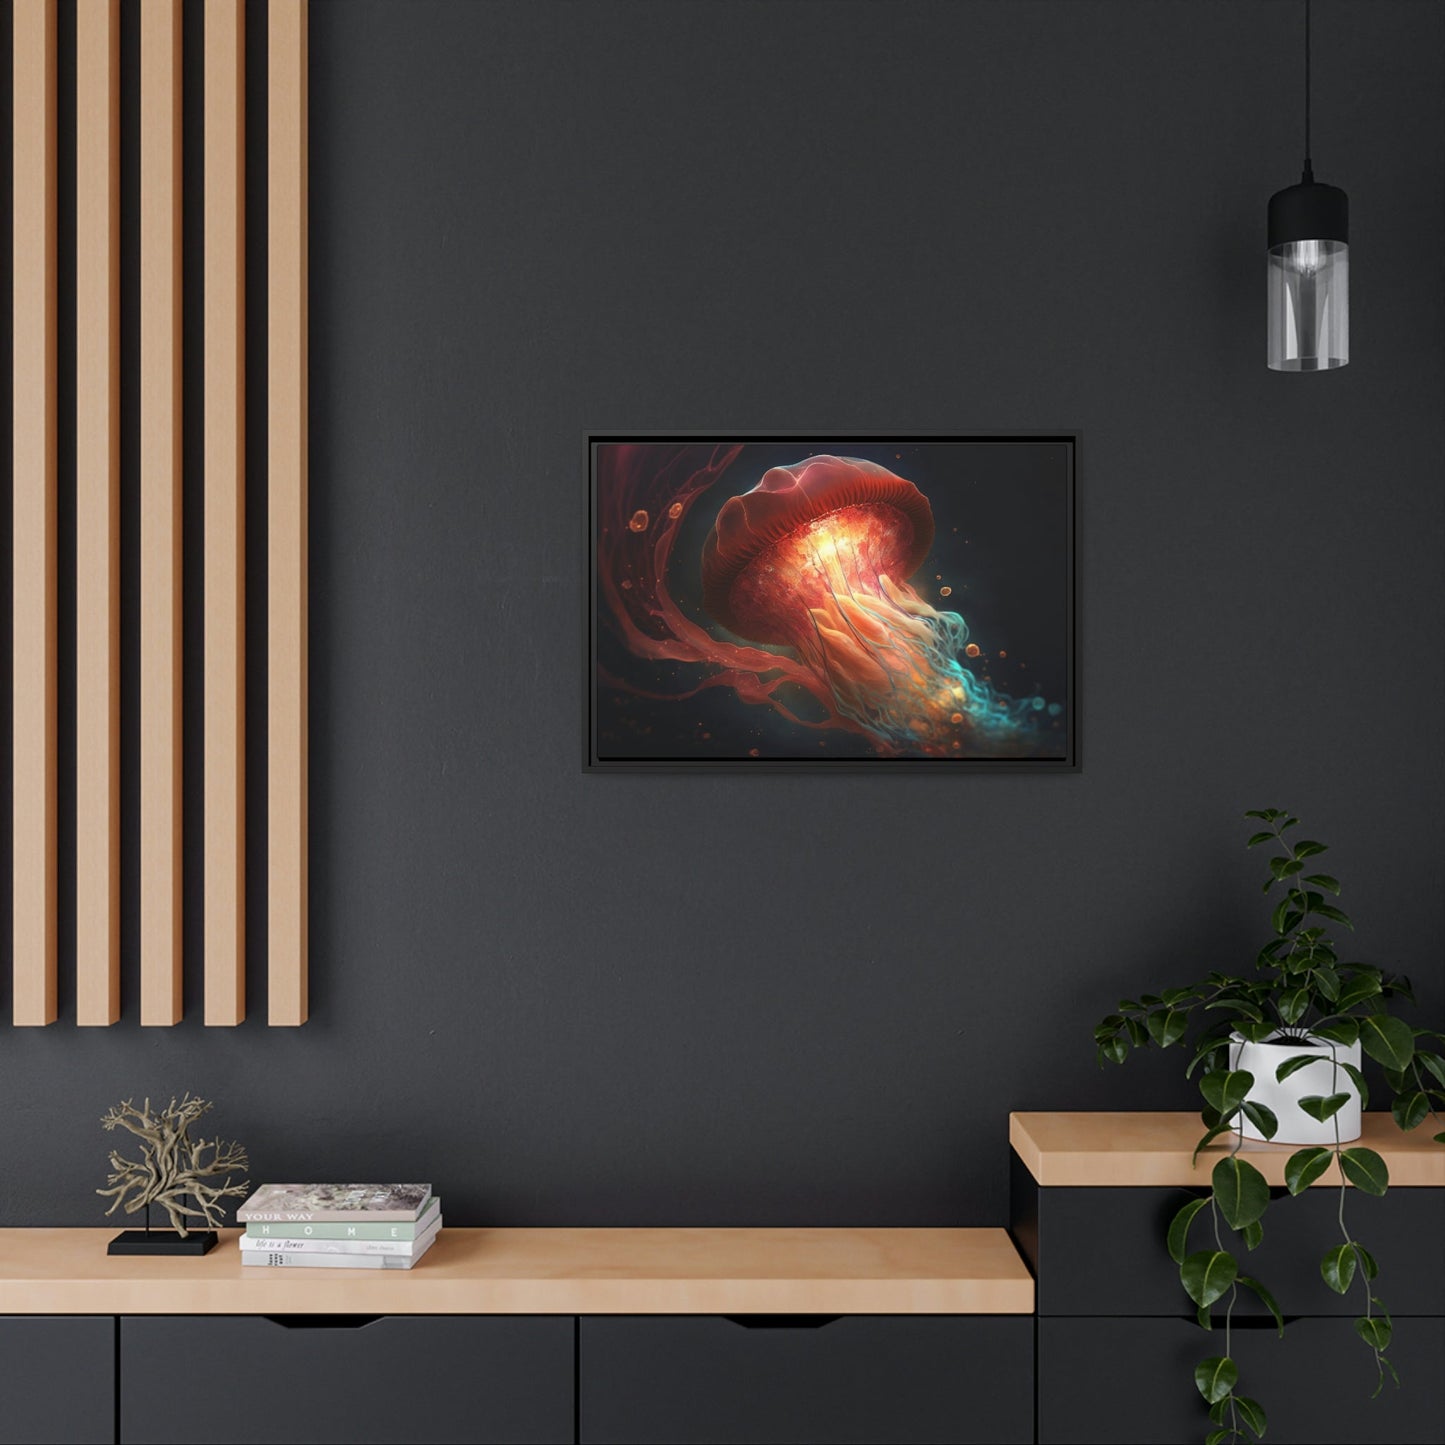 The Graceful Dance: Jellyfish Wall Art Collection on Canvas